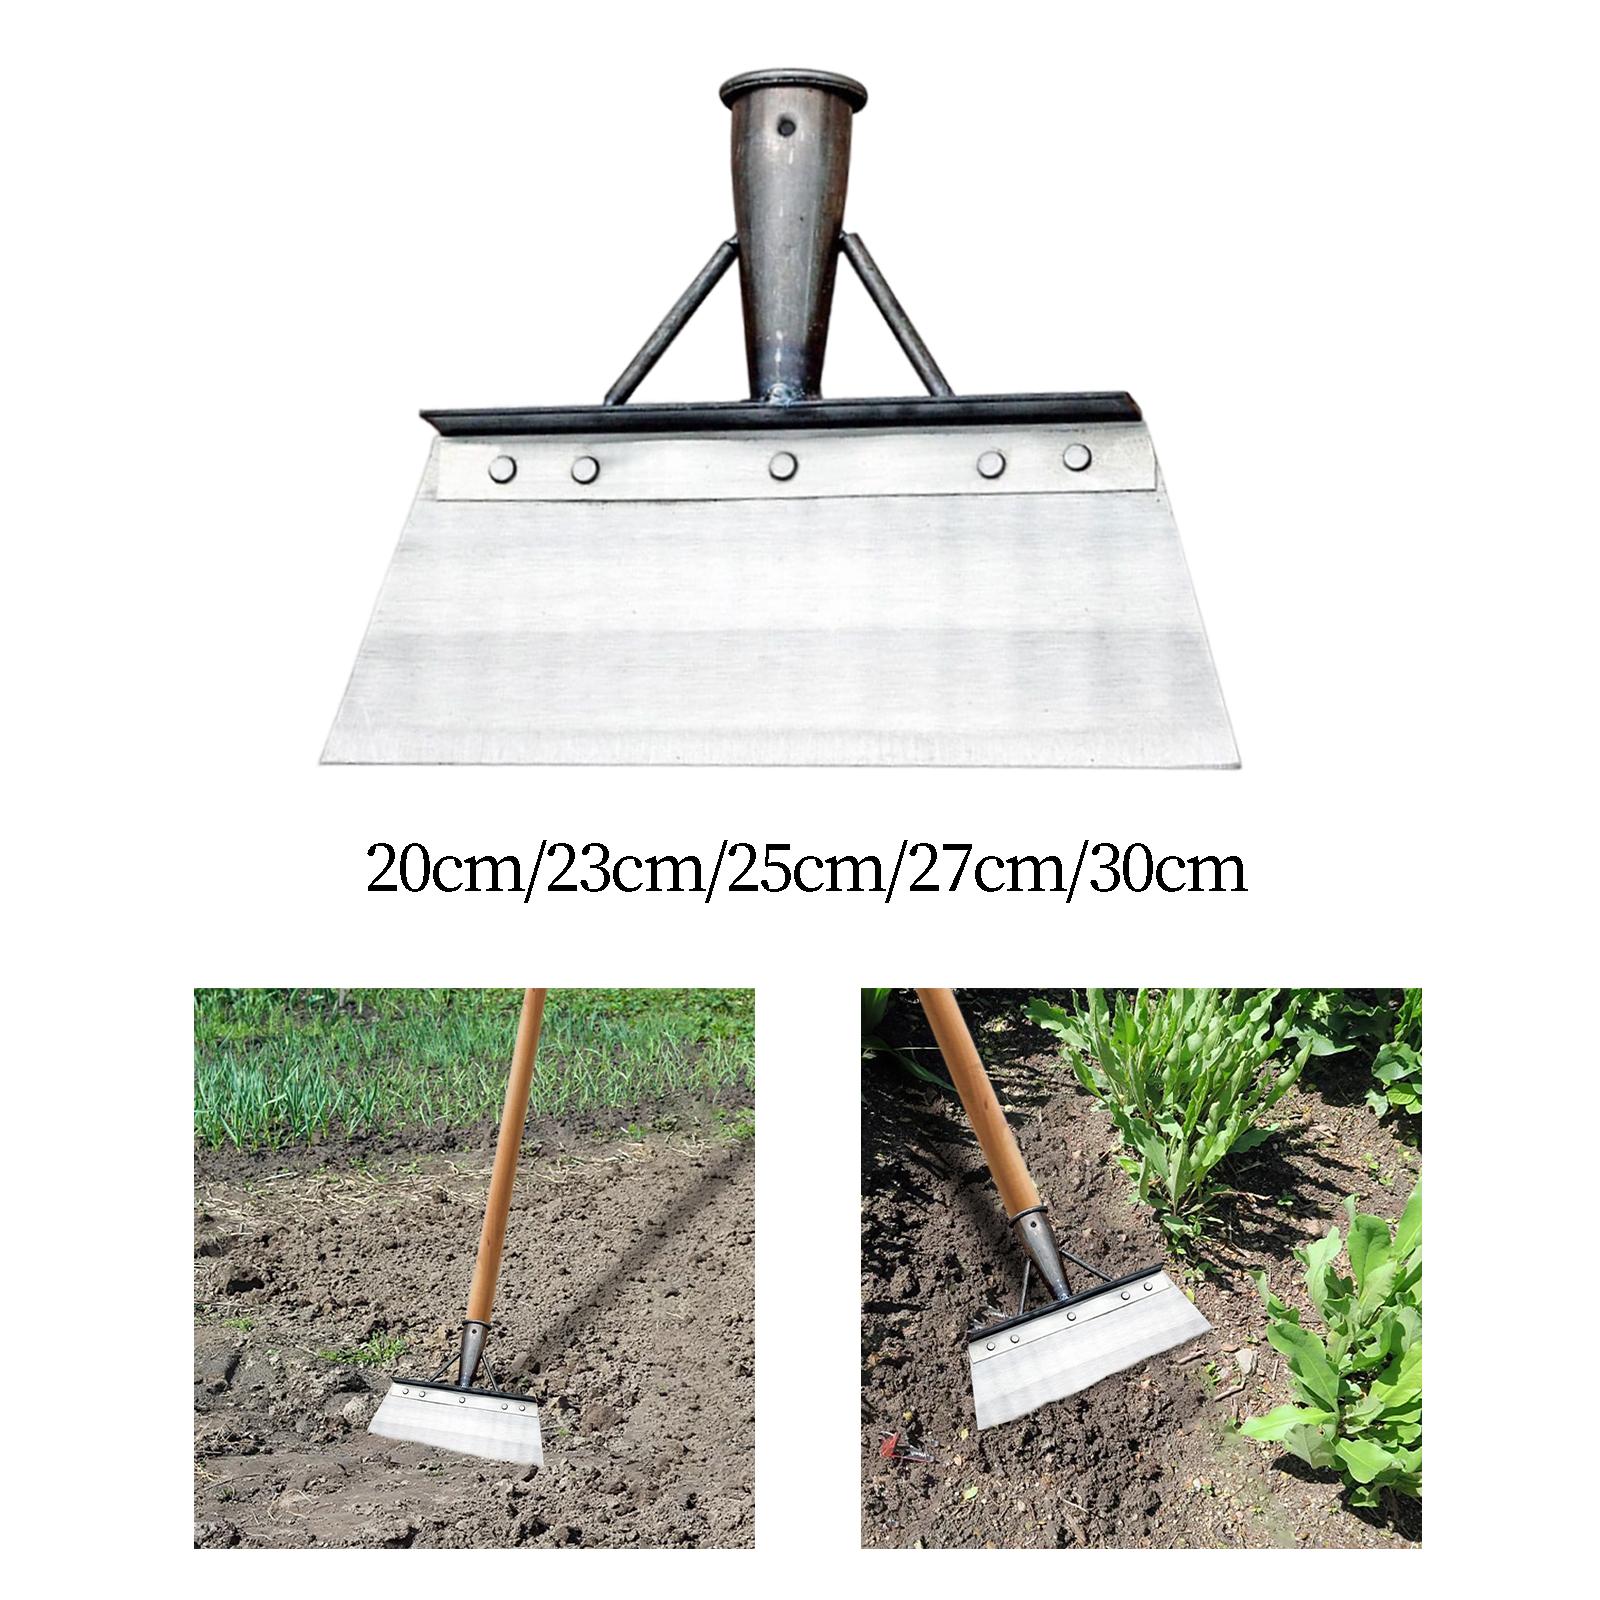 Outdoor Cleaning Shovel Head Wooden Handle Not Include Planting Shovel Head Spade for Farm Landscaping Agriculture Weeding Lawn